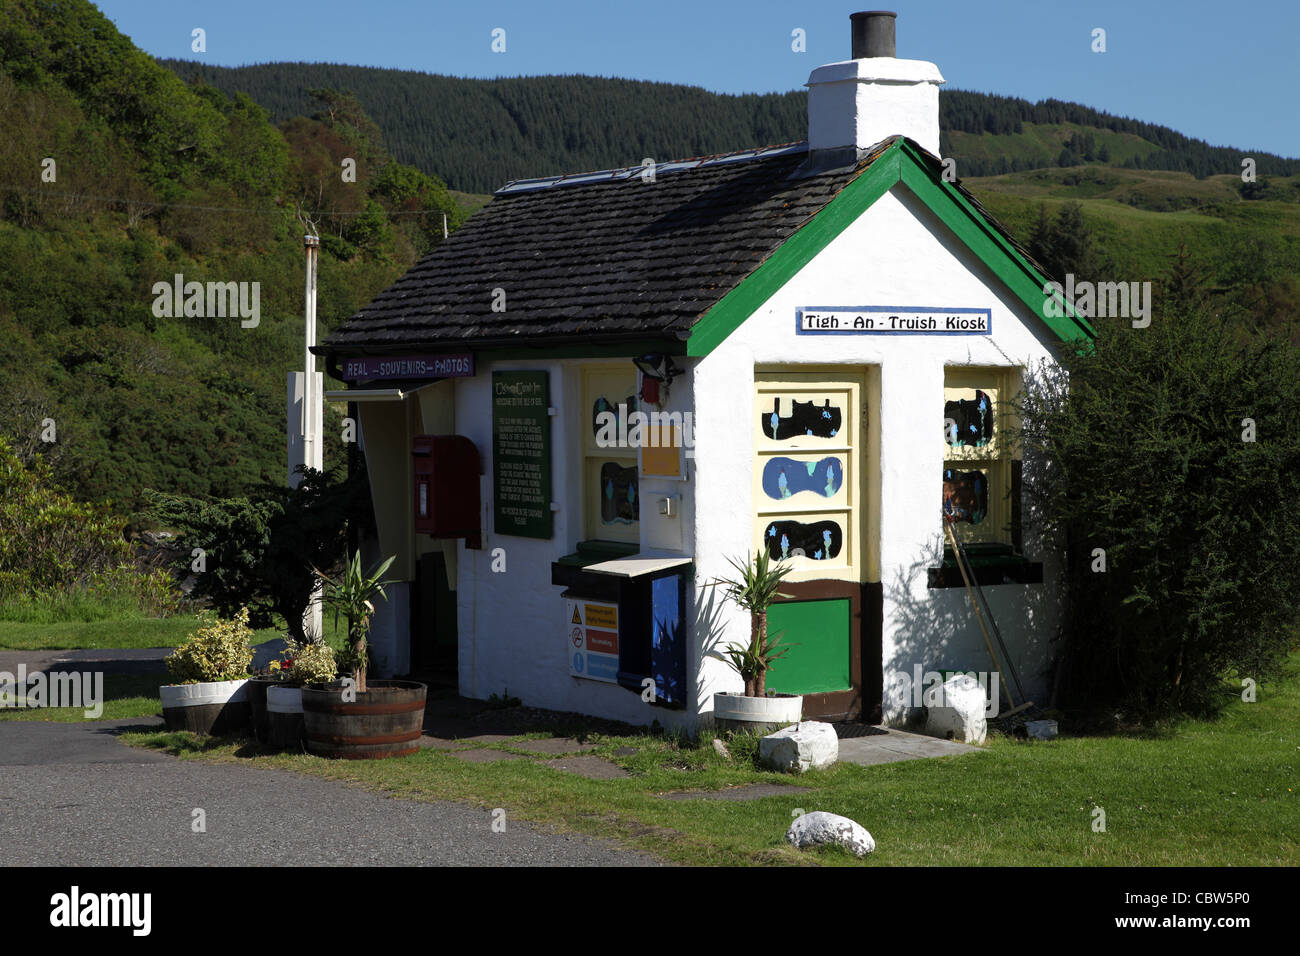 Small shop in Easdale - Seil Island - Argyll and Bute - Scotland - UK Stock Photo